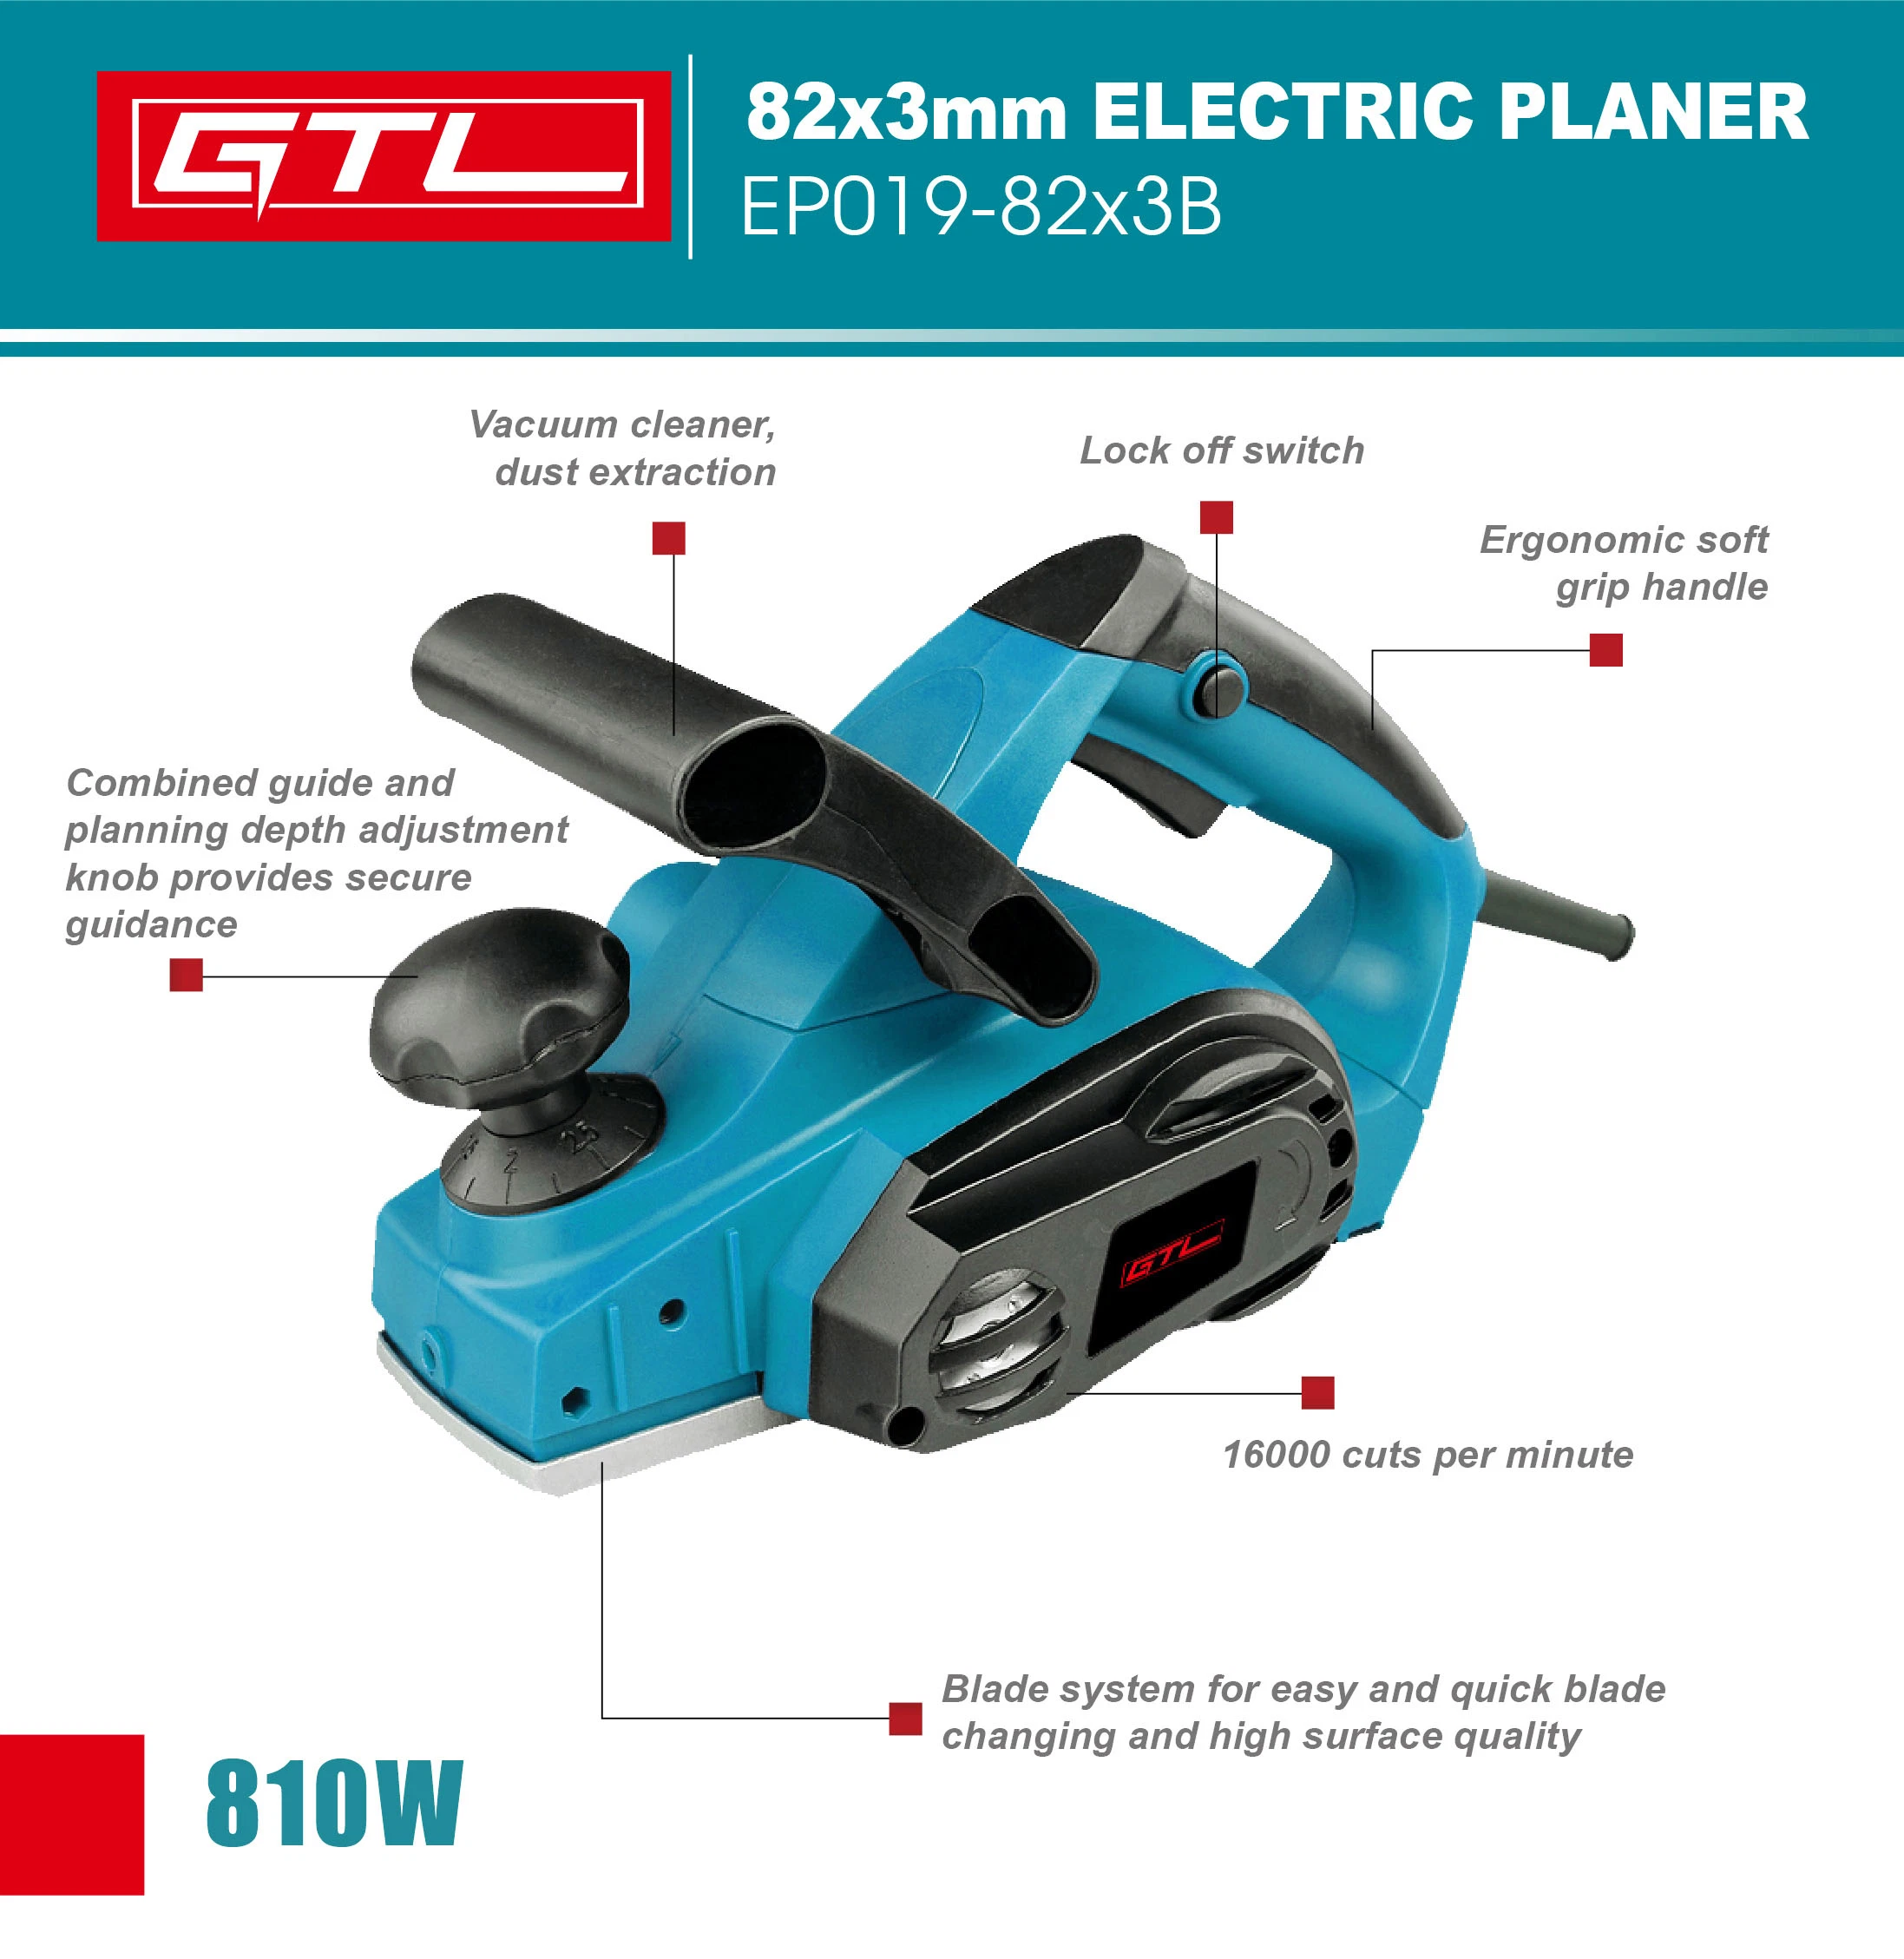 High Speed 810W Thickness Electric Wood Planer, Power Tools of Portable Electric Wood Planer (EP019-82X3B)